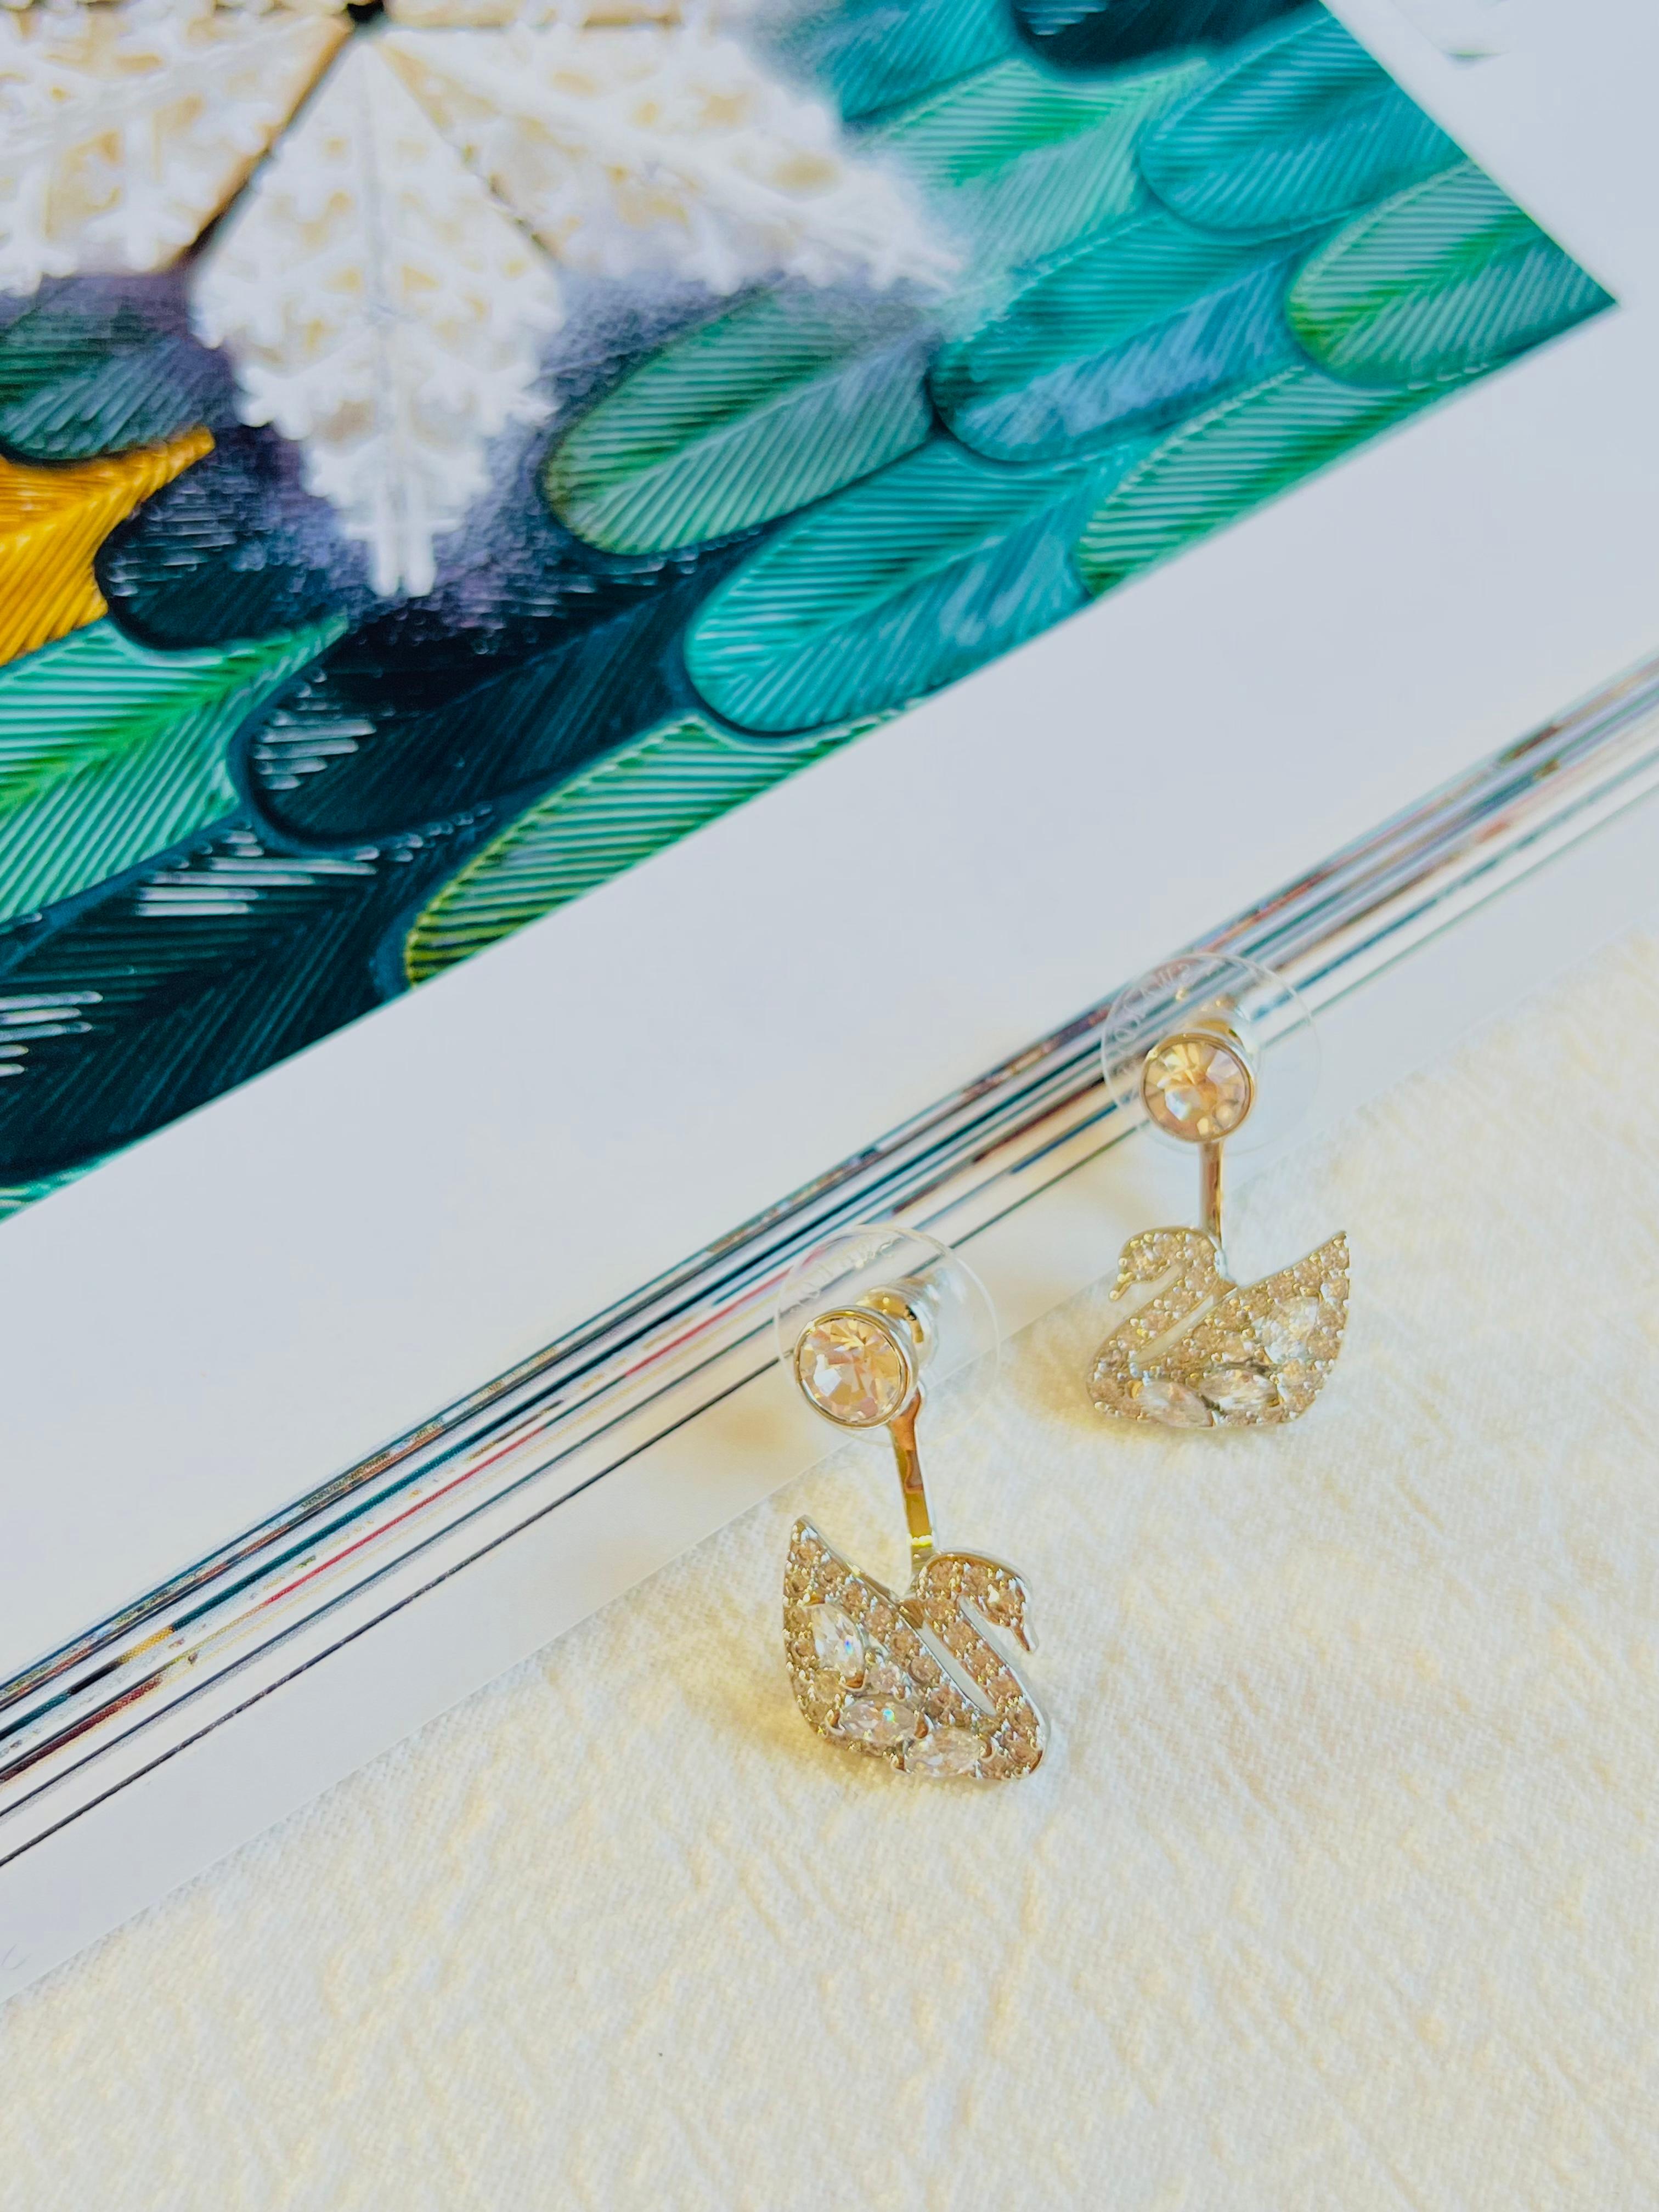 Come with original box and certificate. 100% Genuine. 

This versatile pair of pierced earring jackets is feminine and sophisticated. Wear the rhodium-plated crystal studs alone or add the dangling swans, embellished with pavé and marquise-shaped